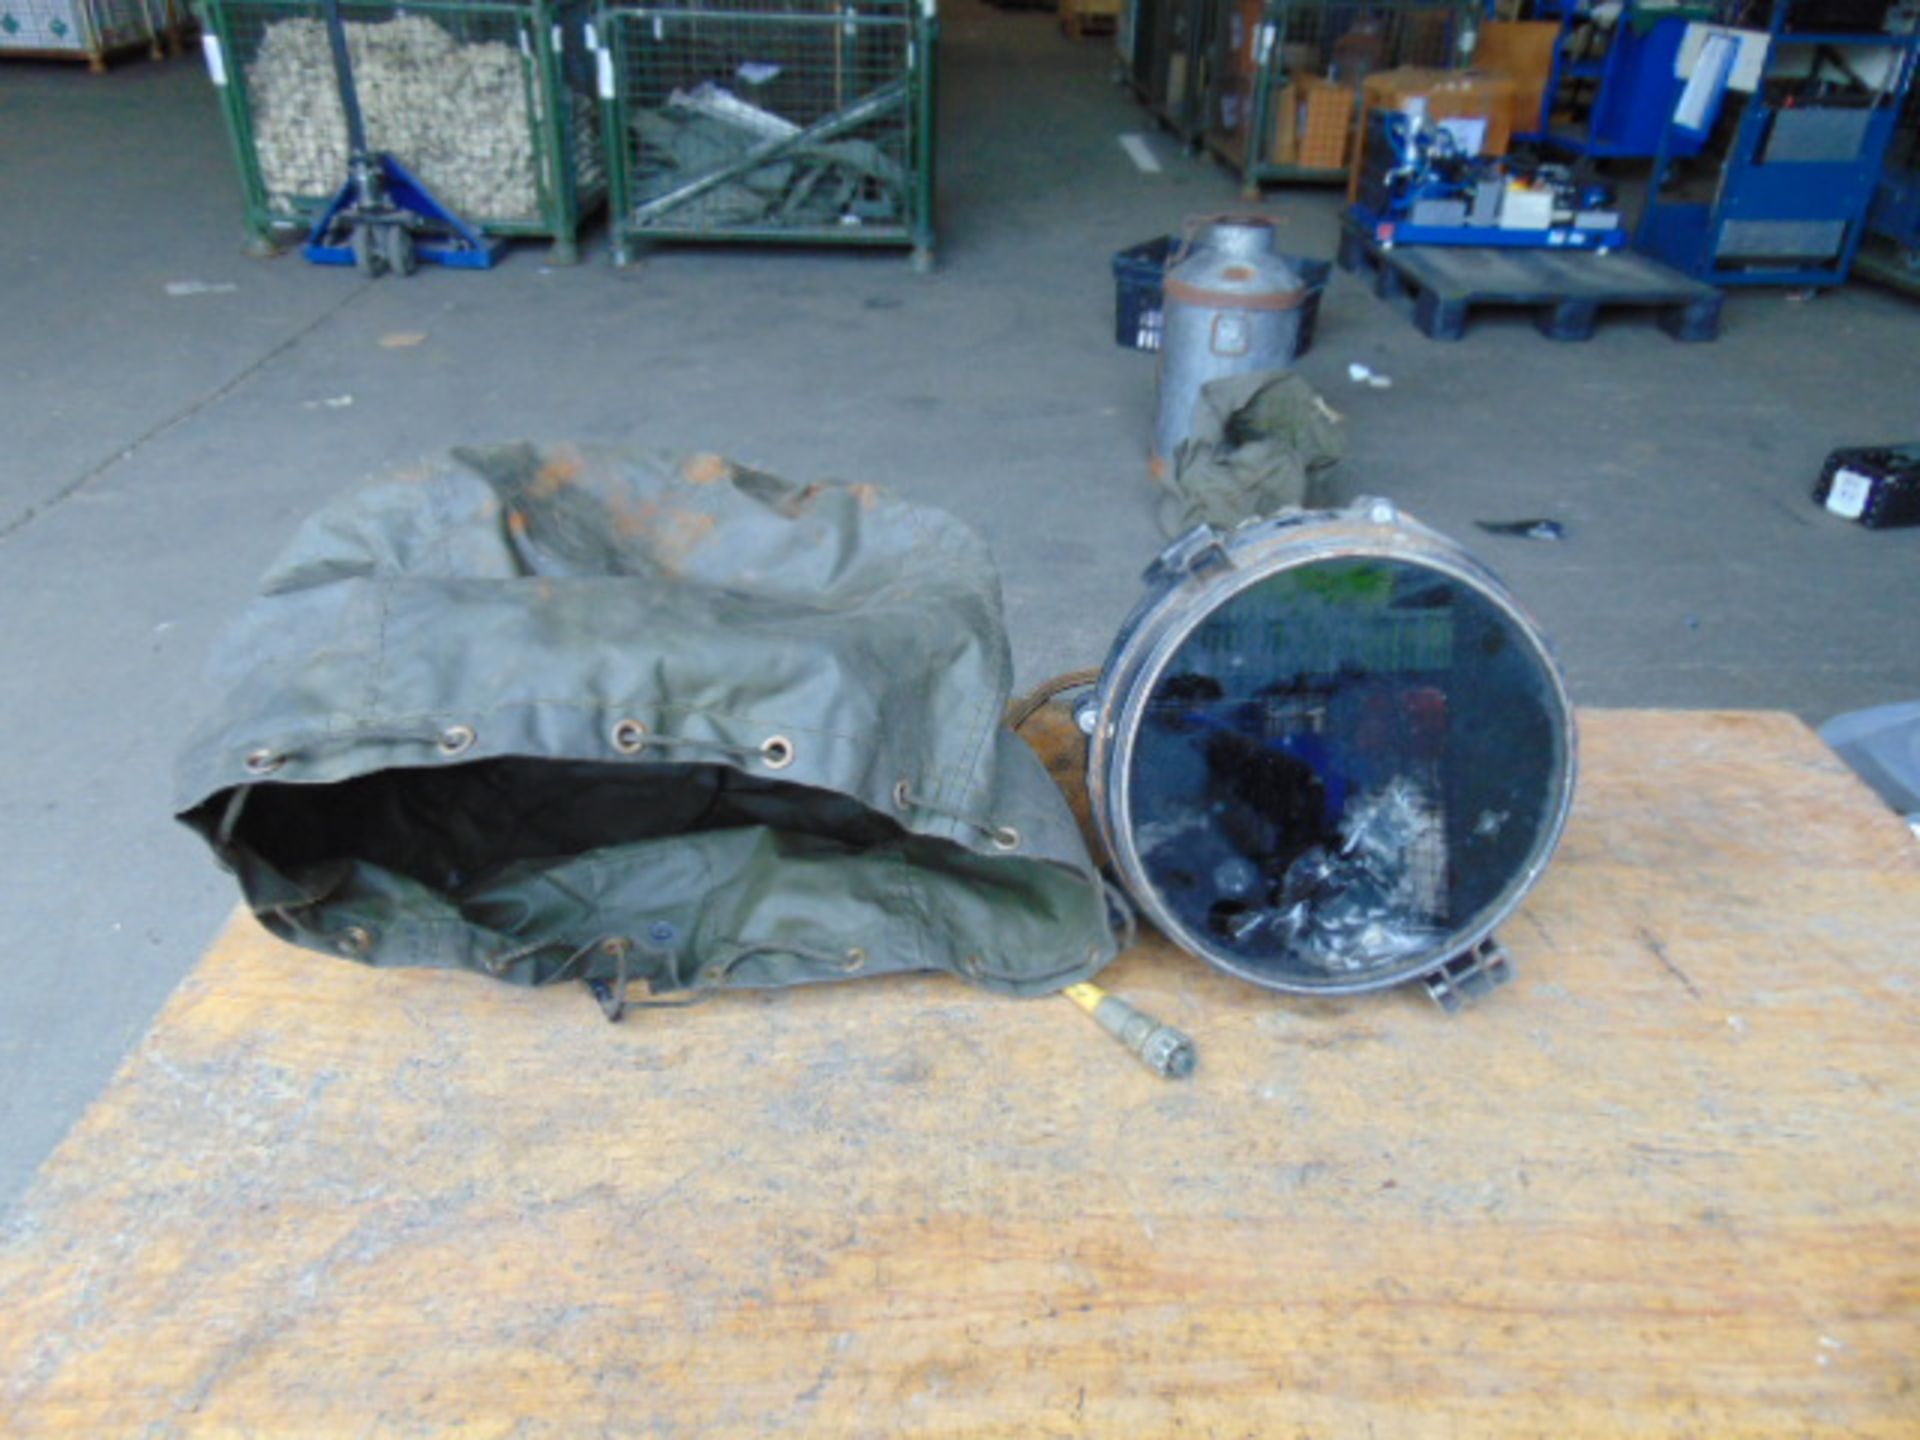 FV Heavy Duty Vehicle Mounted Search Light with cover and Infra Red Filter - Image 5 of 5